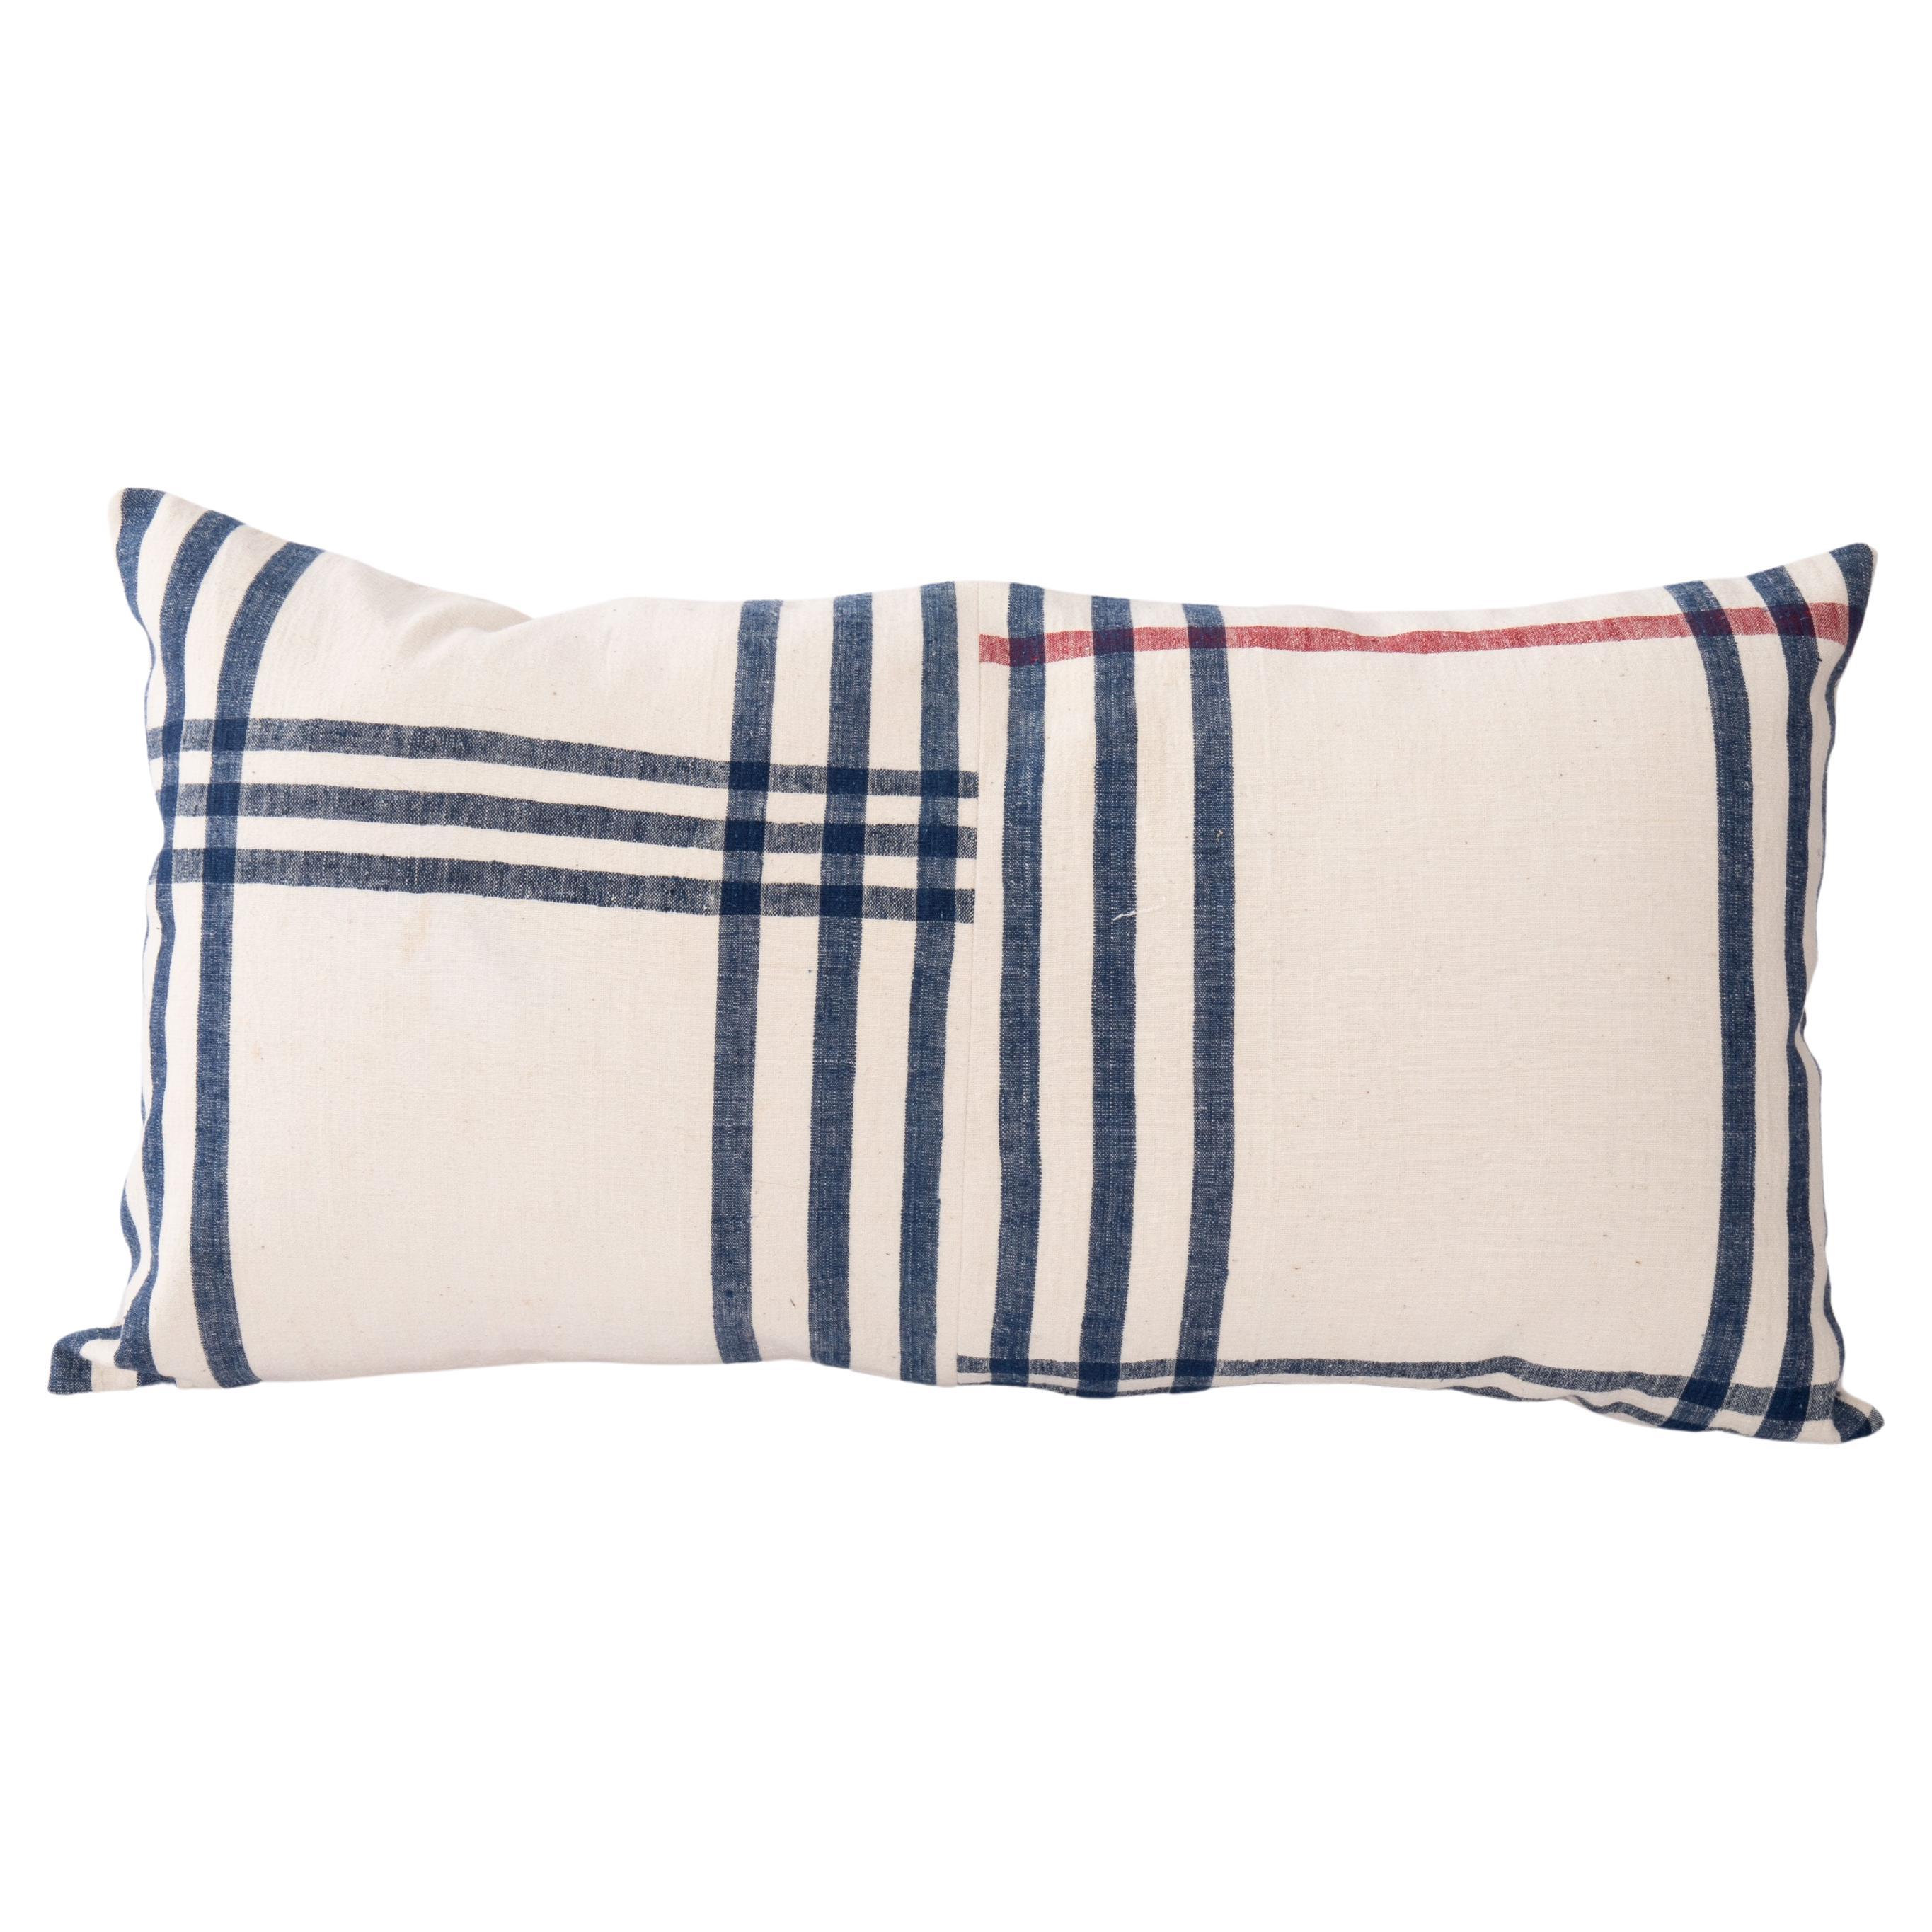 Lumbar Pillow Cover Made from a Vintage Anatolian Cotton Weaving, Mid 20th C.